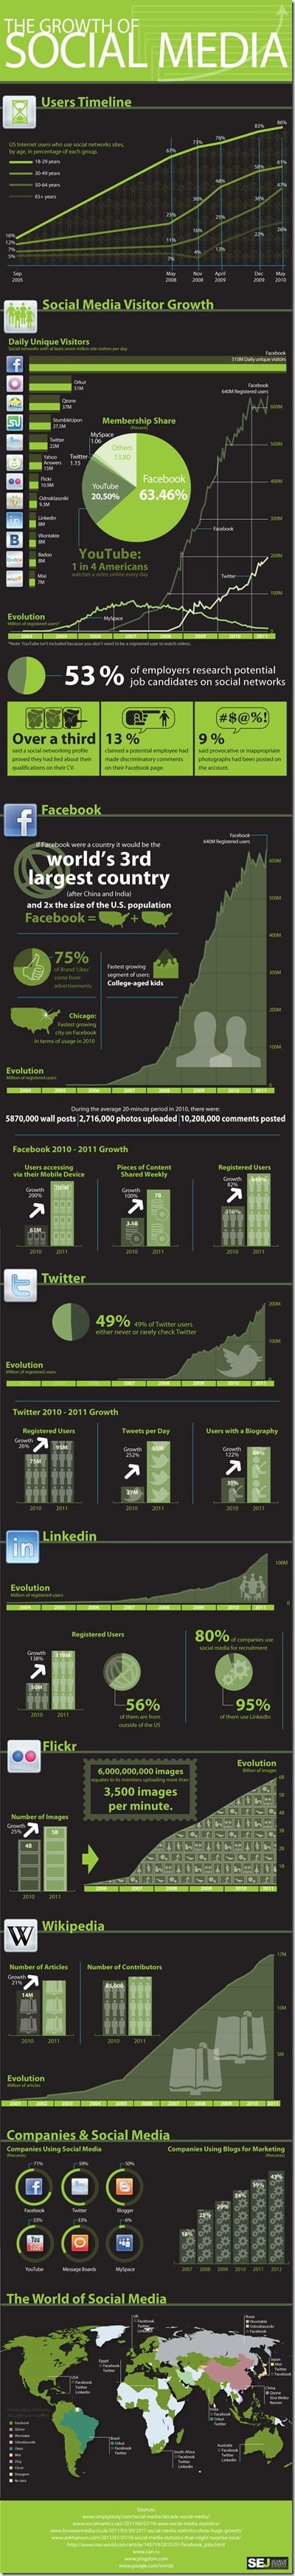 Infographic: Growing Social Media